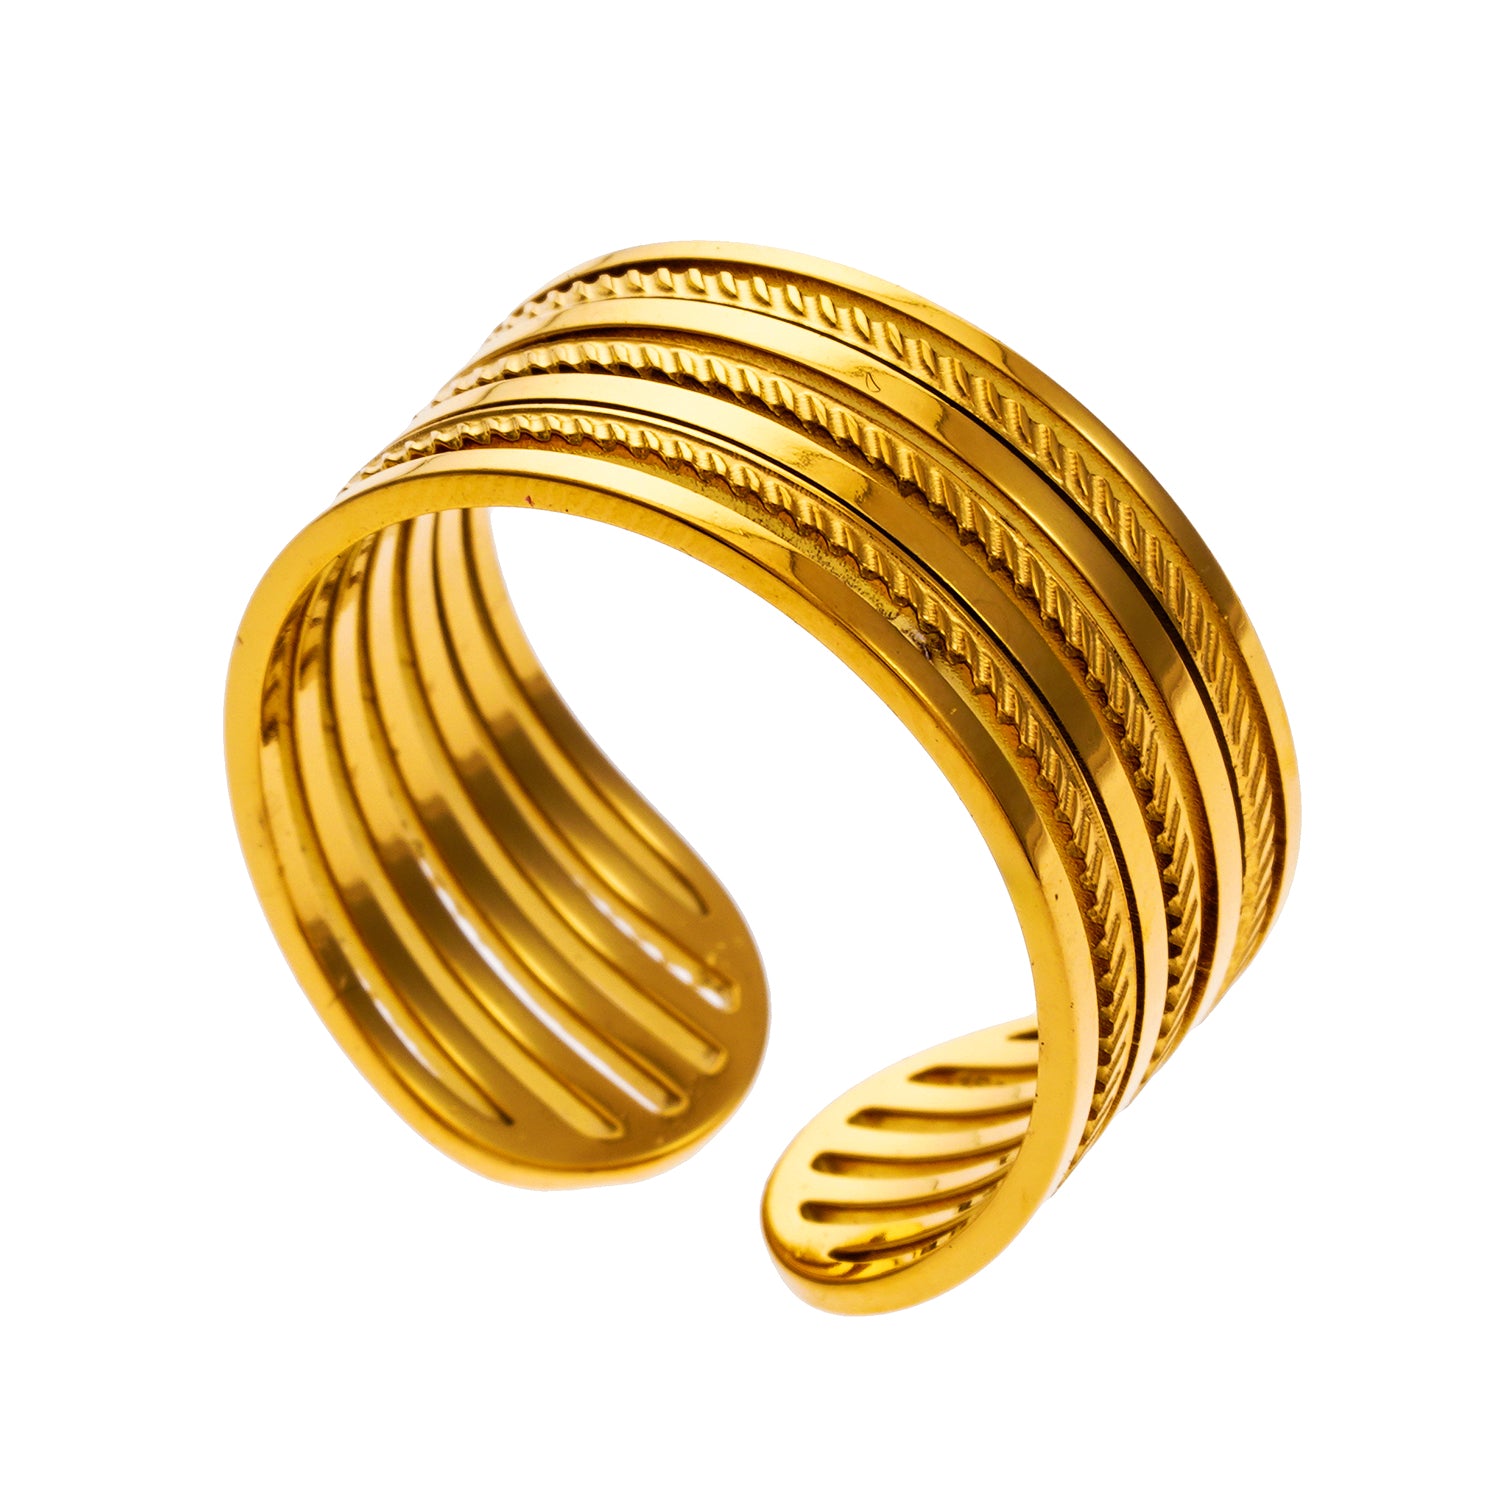 Style REYNA 2802: Multi Stacked Contrast Textured Contemporary Ring.